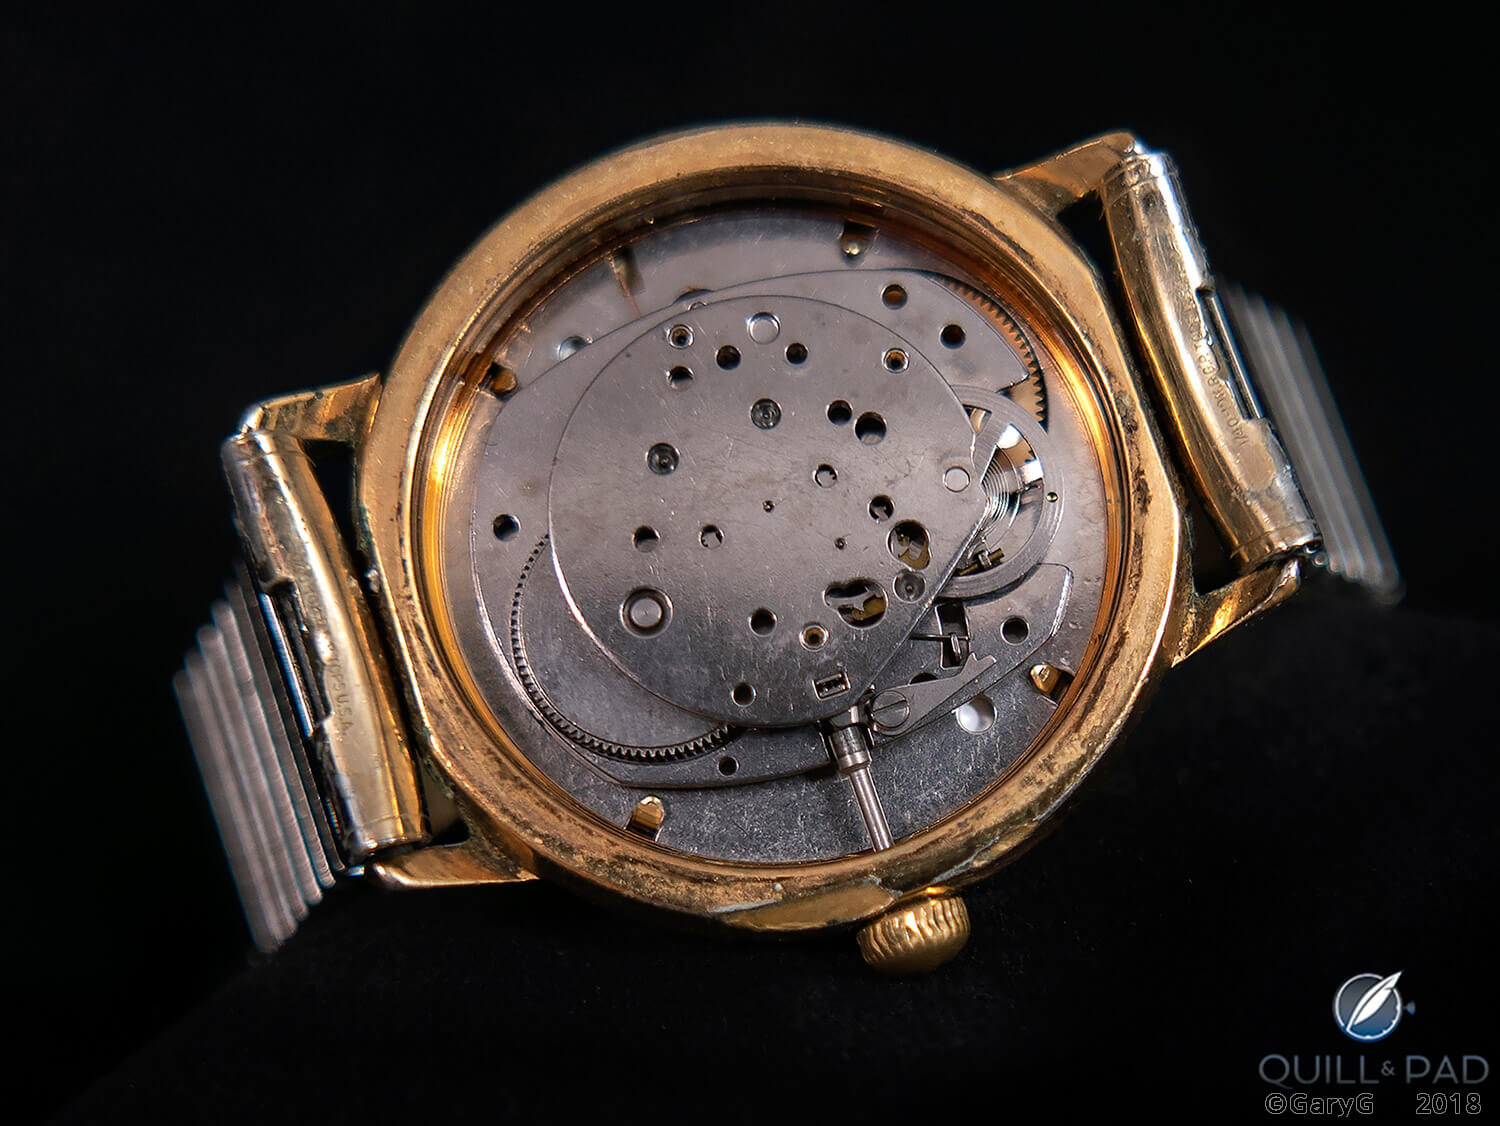 Timex Number 27 movement from the early 1970s